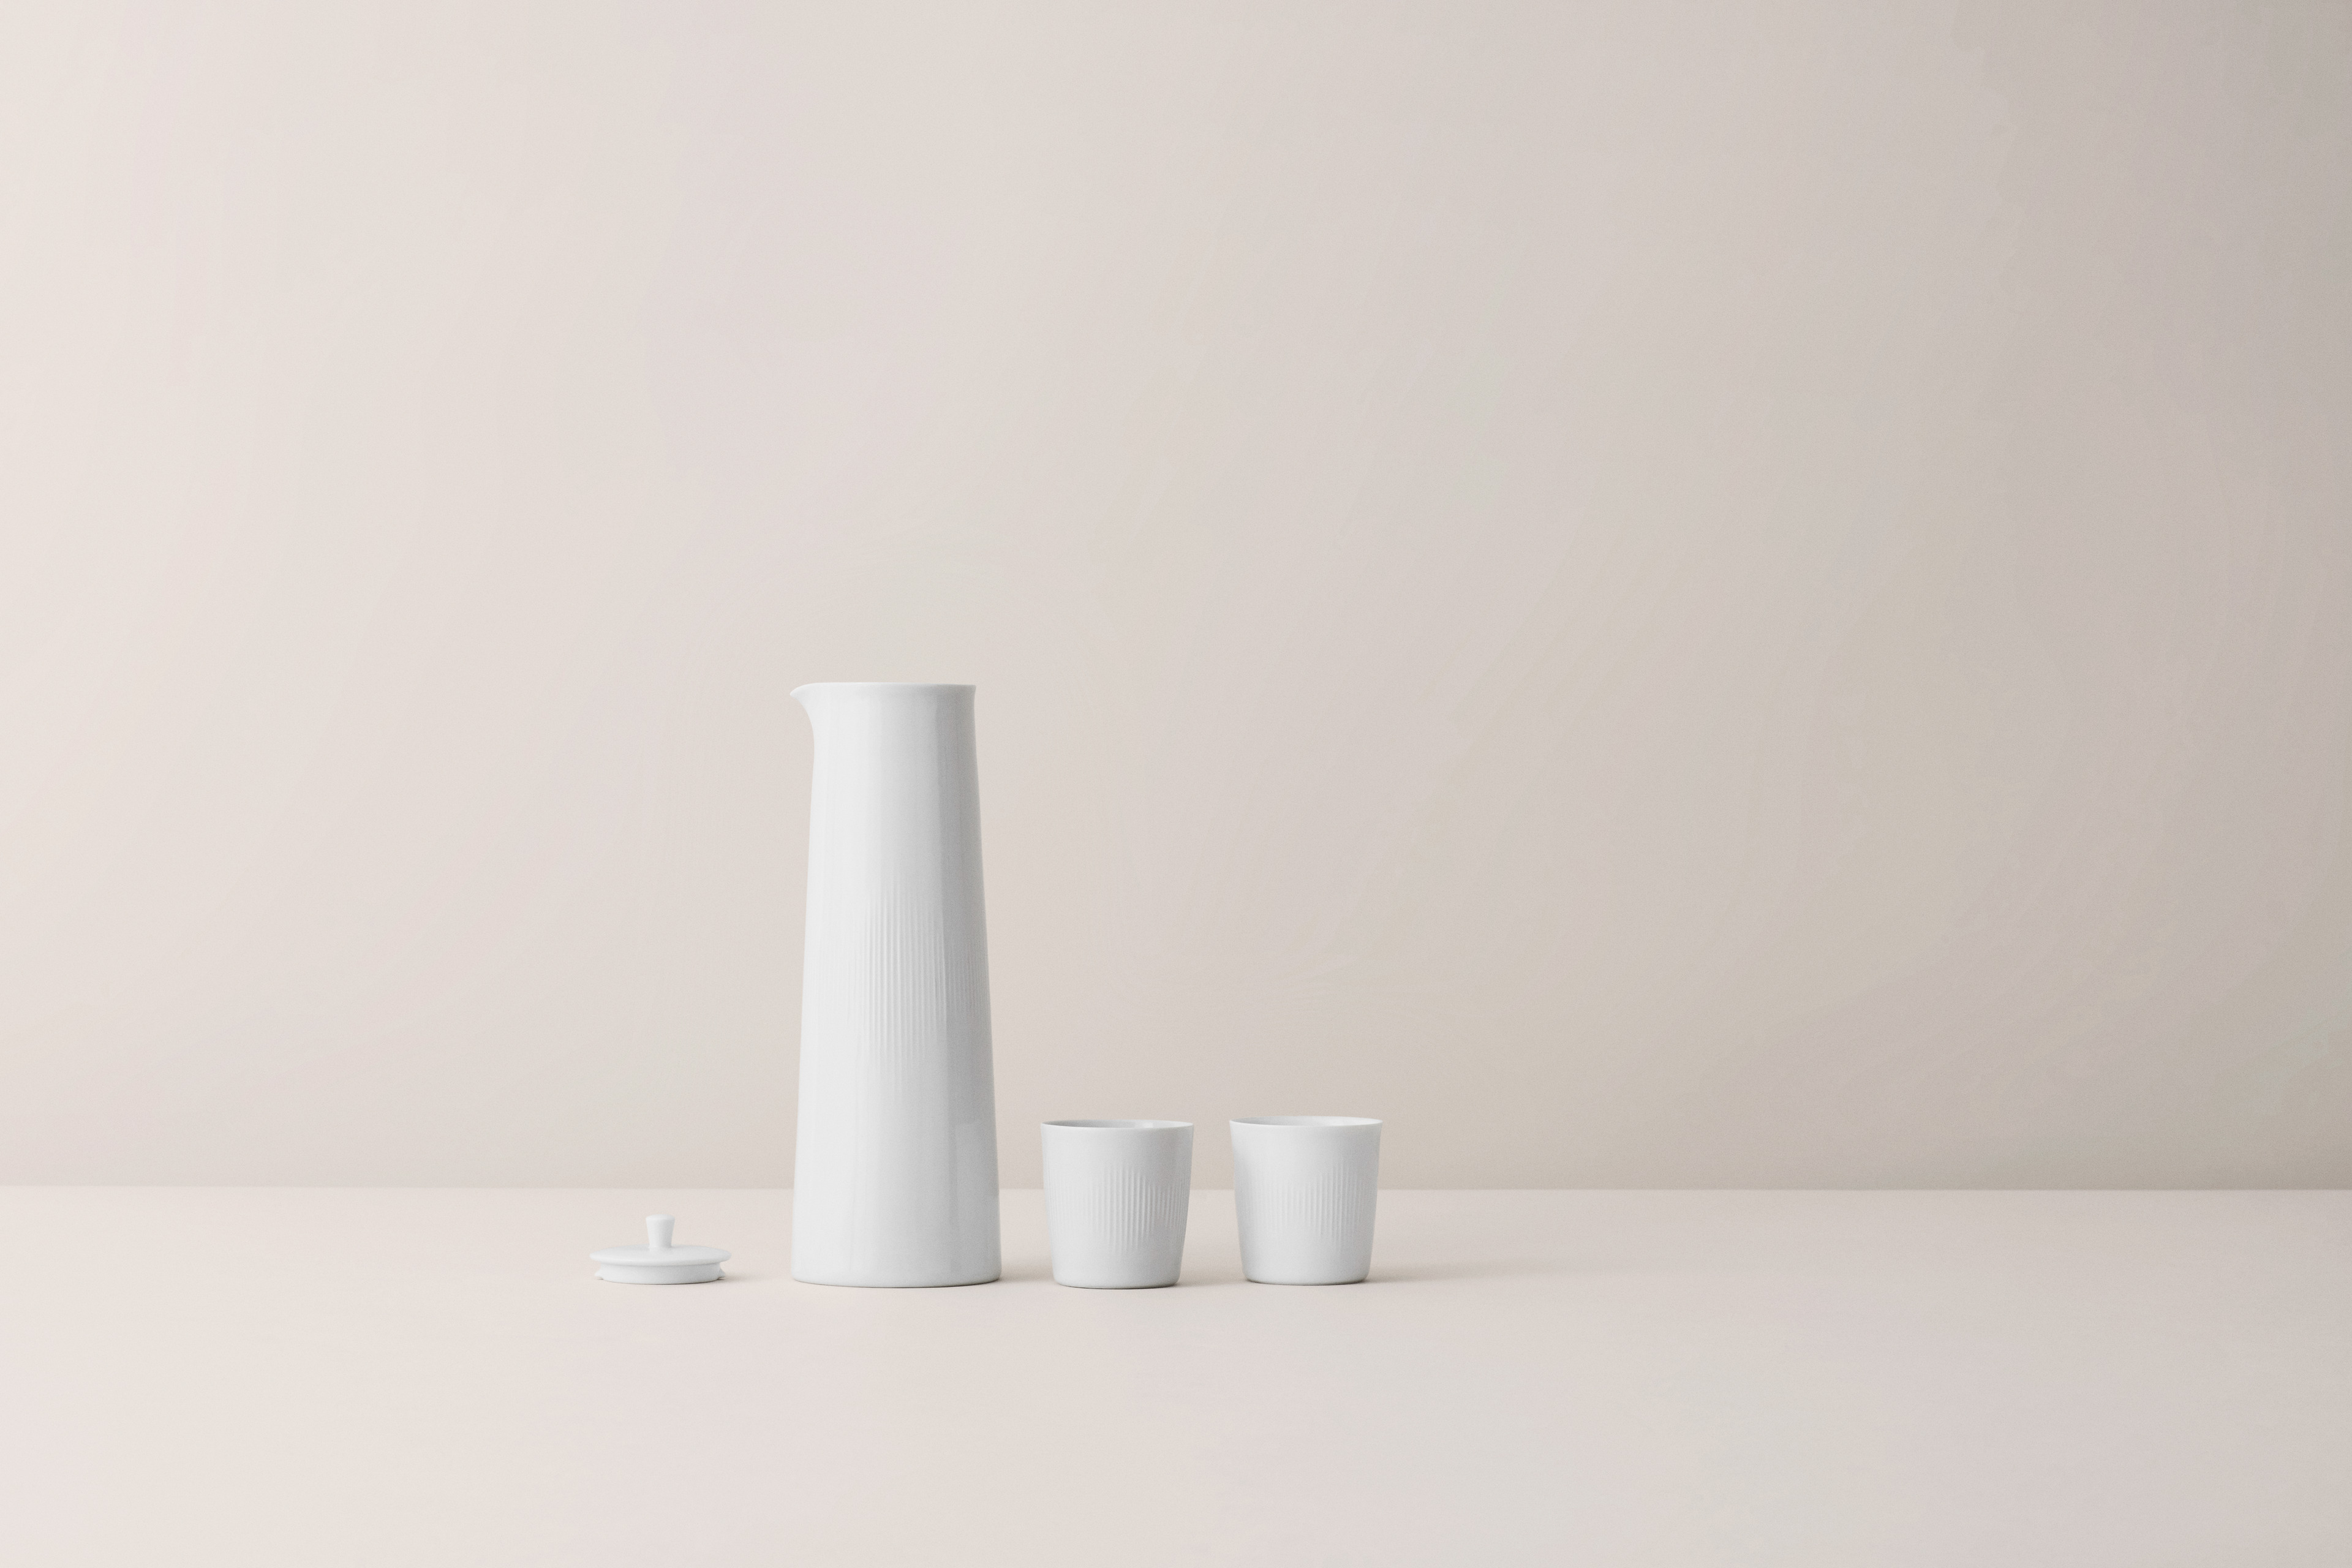 Jug and cups in the Thermodan series from Lyngby Porcelæn